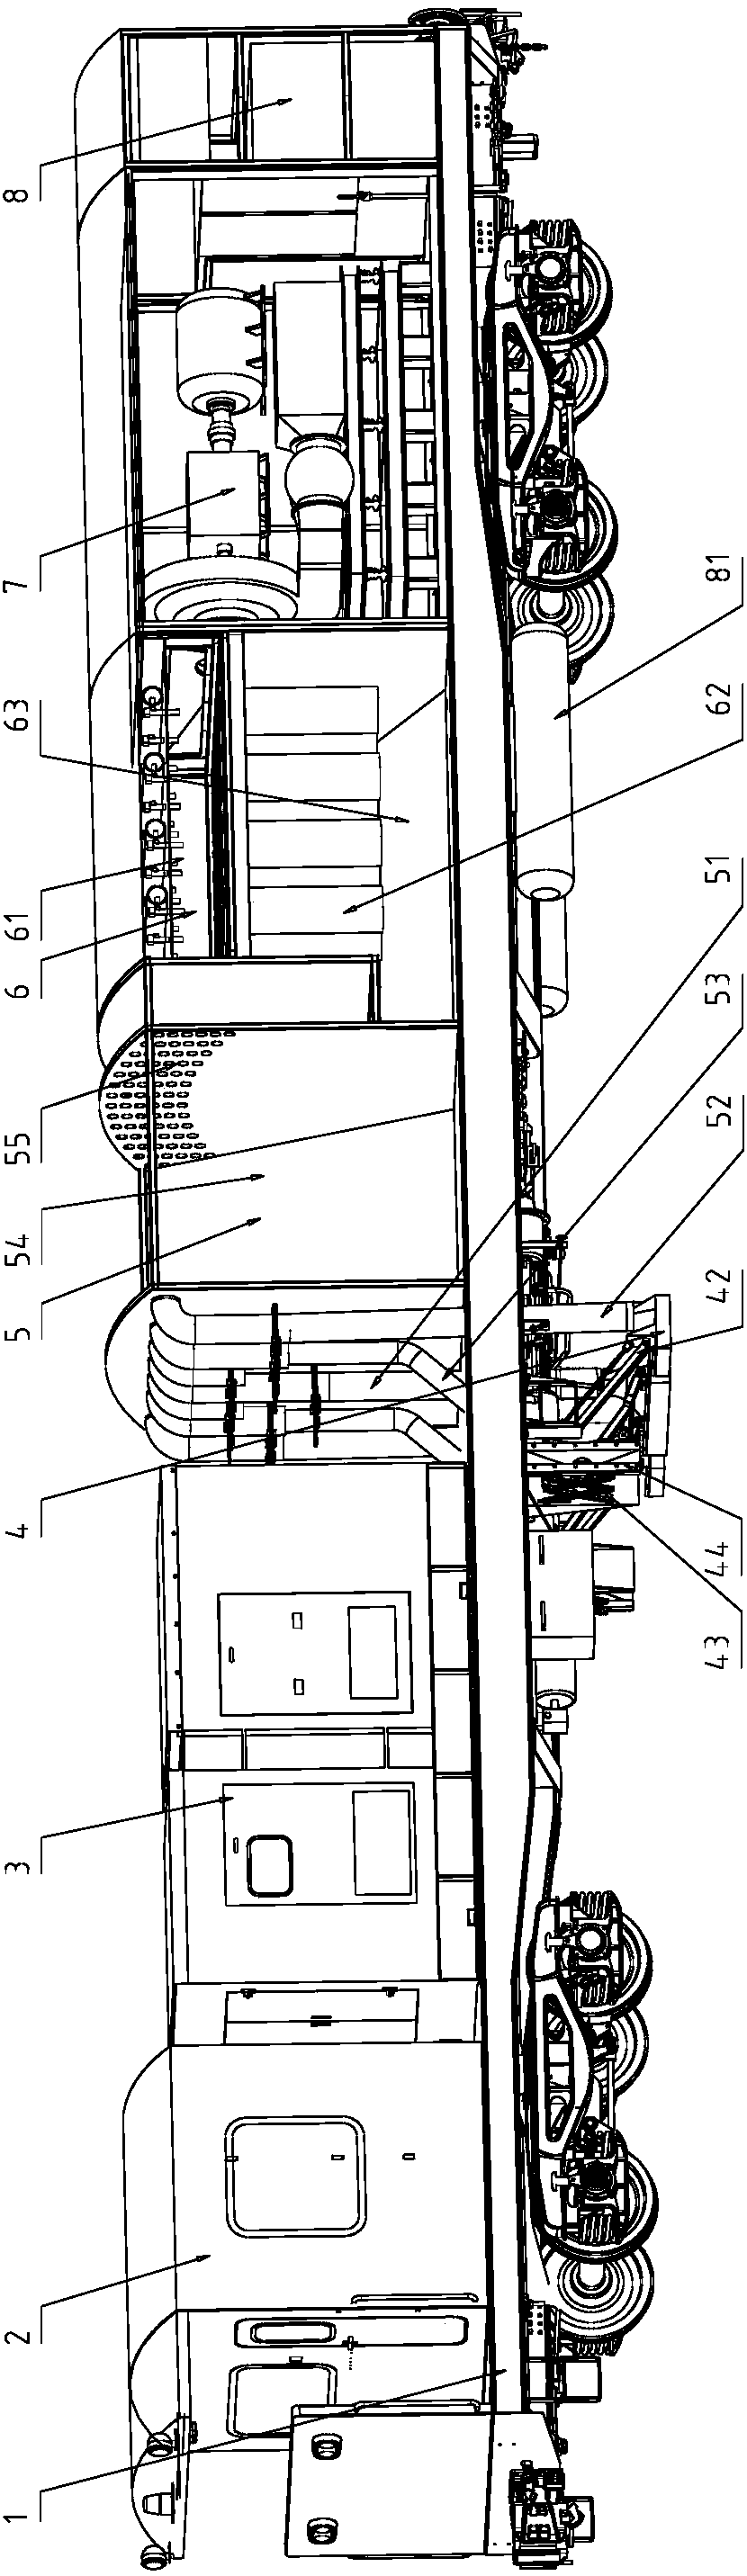 Suction-type track cleaning vehicle, method and application